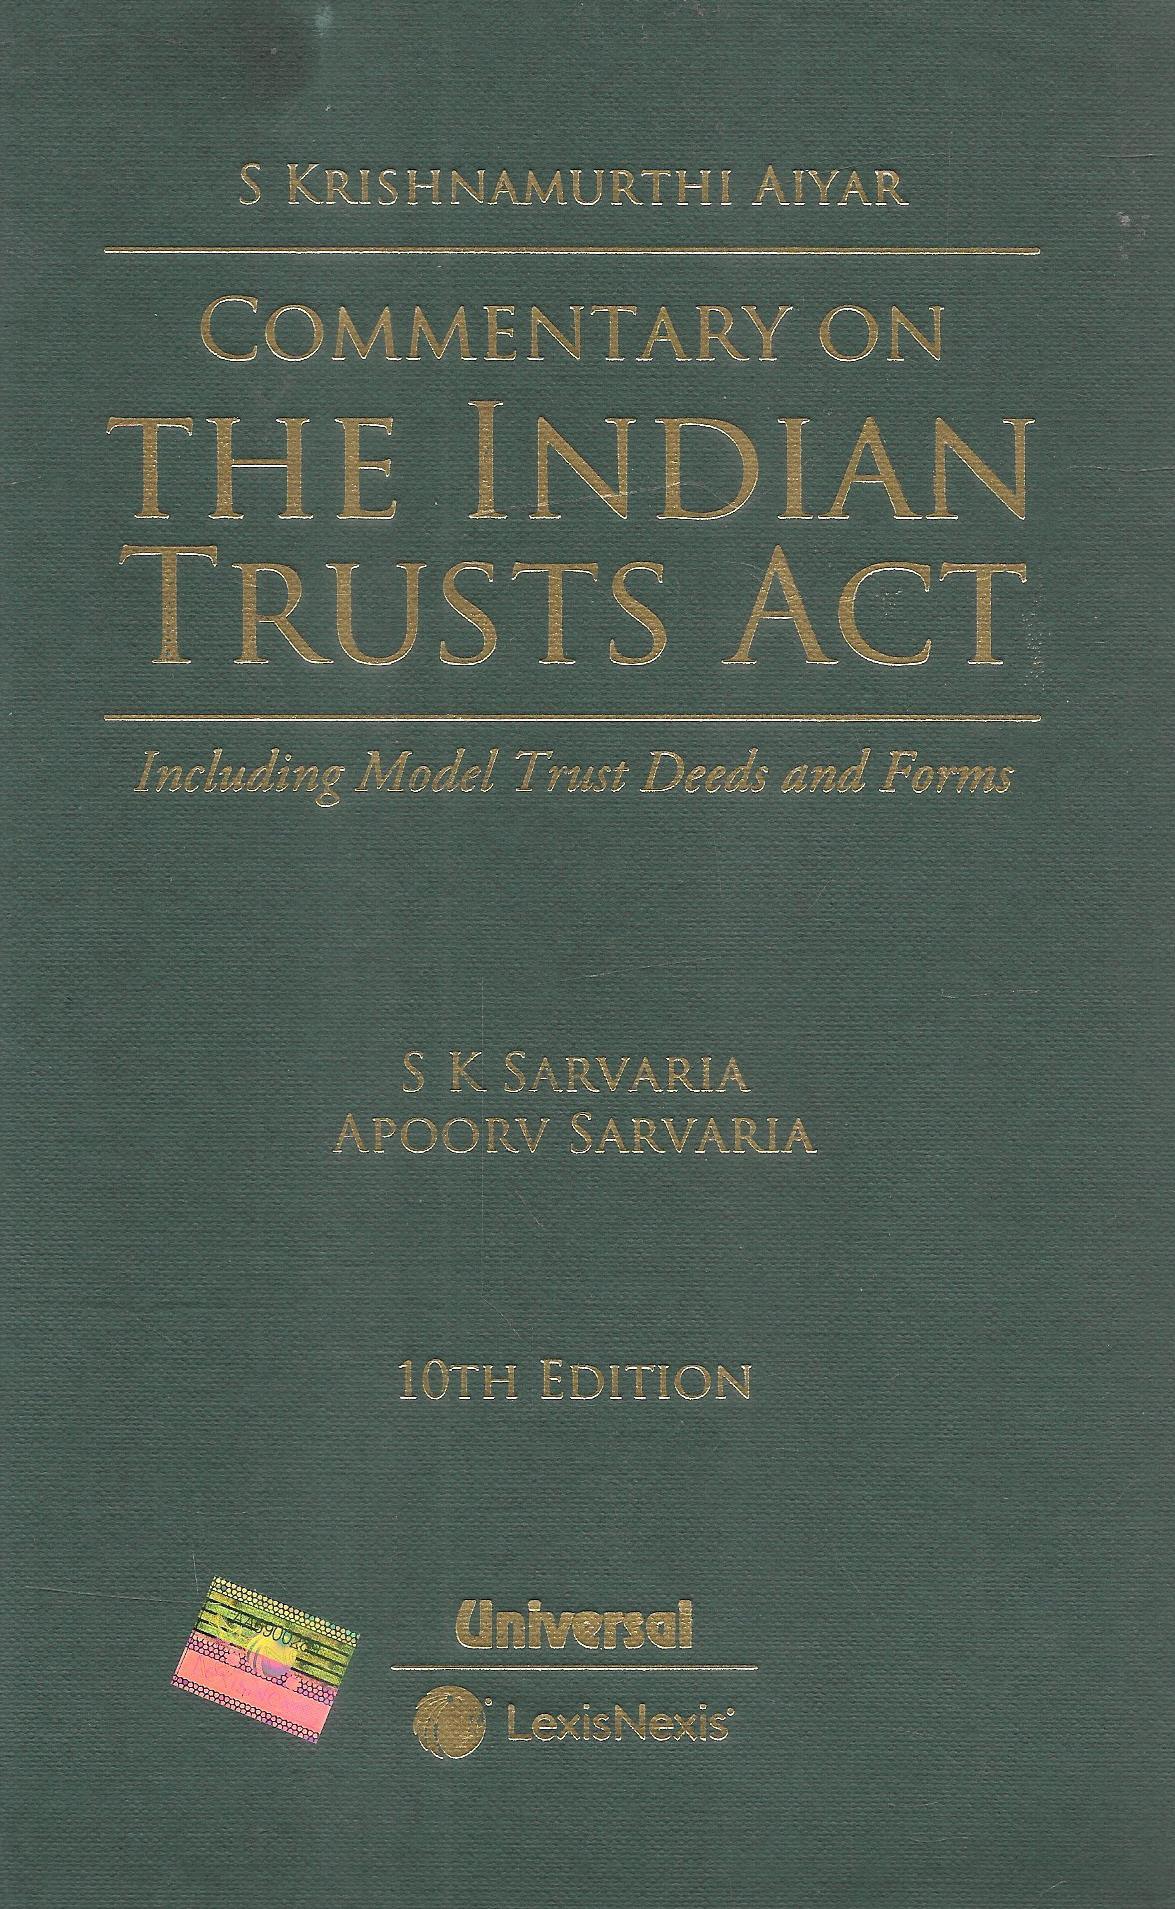 Commentary on the Indian Trusts Act